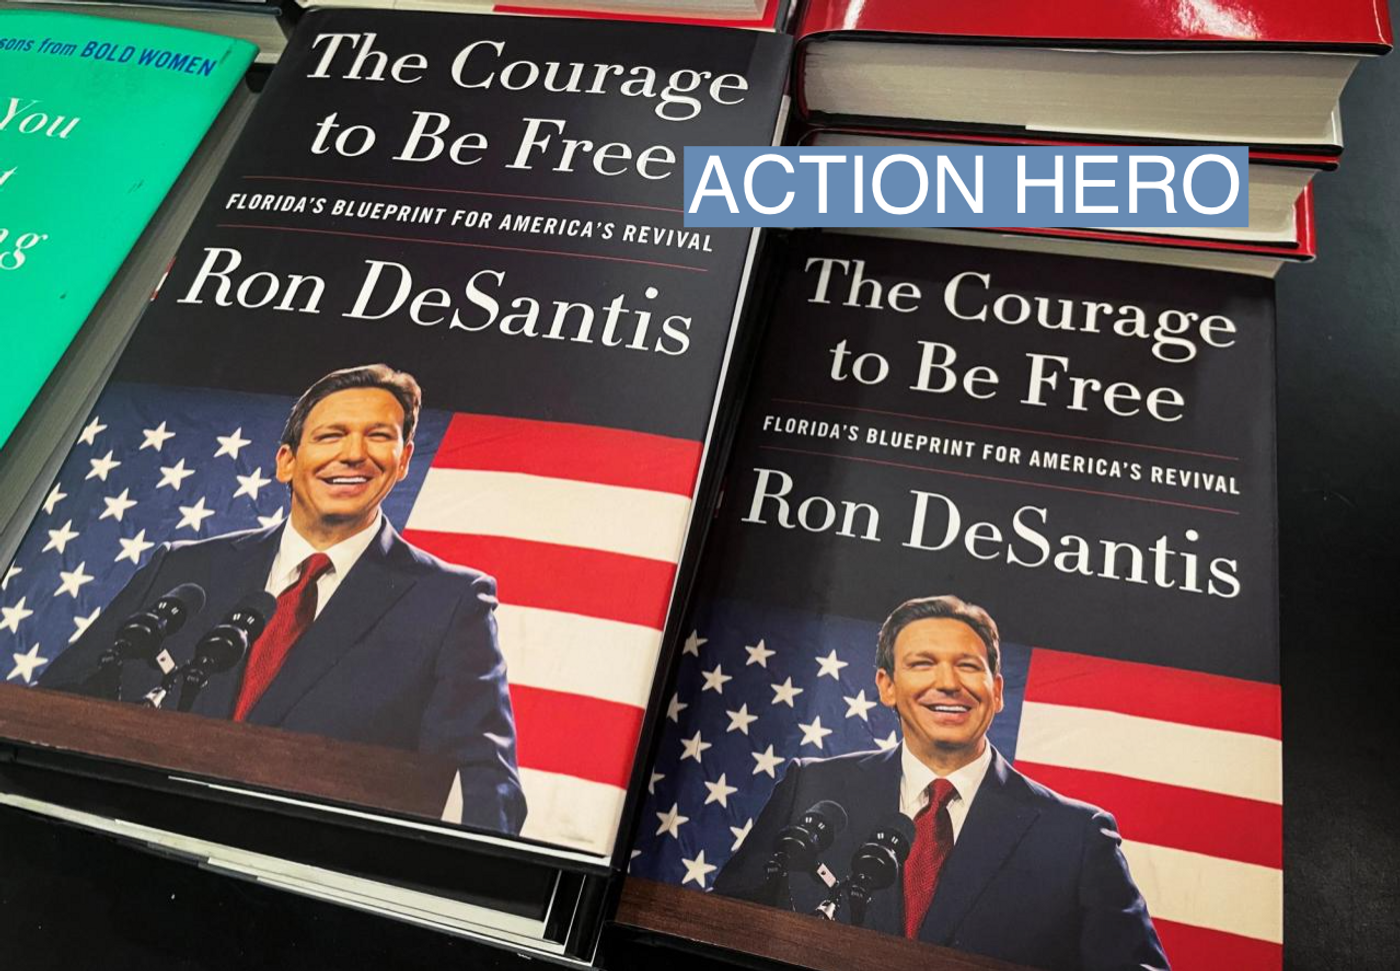 Copies of Ron Desantis' book "The Courage To Be Free"